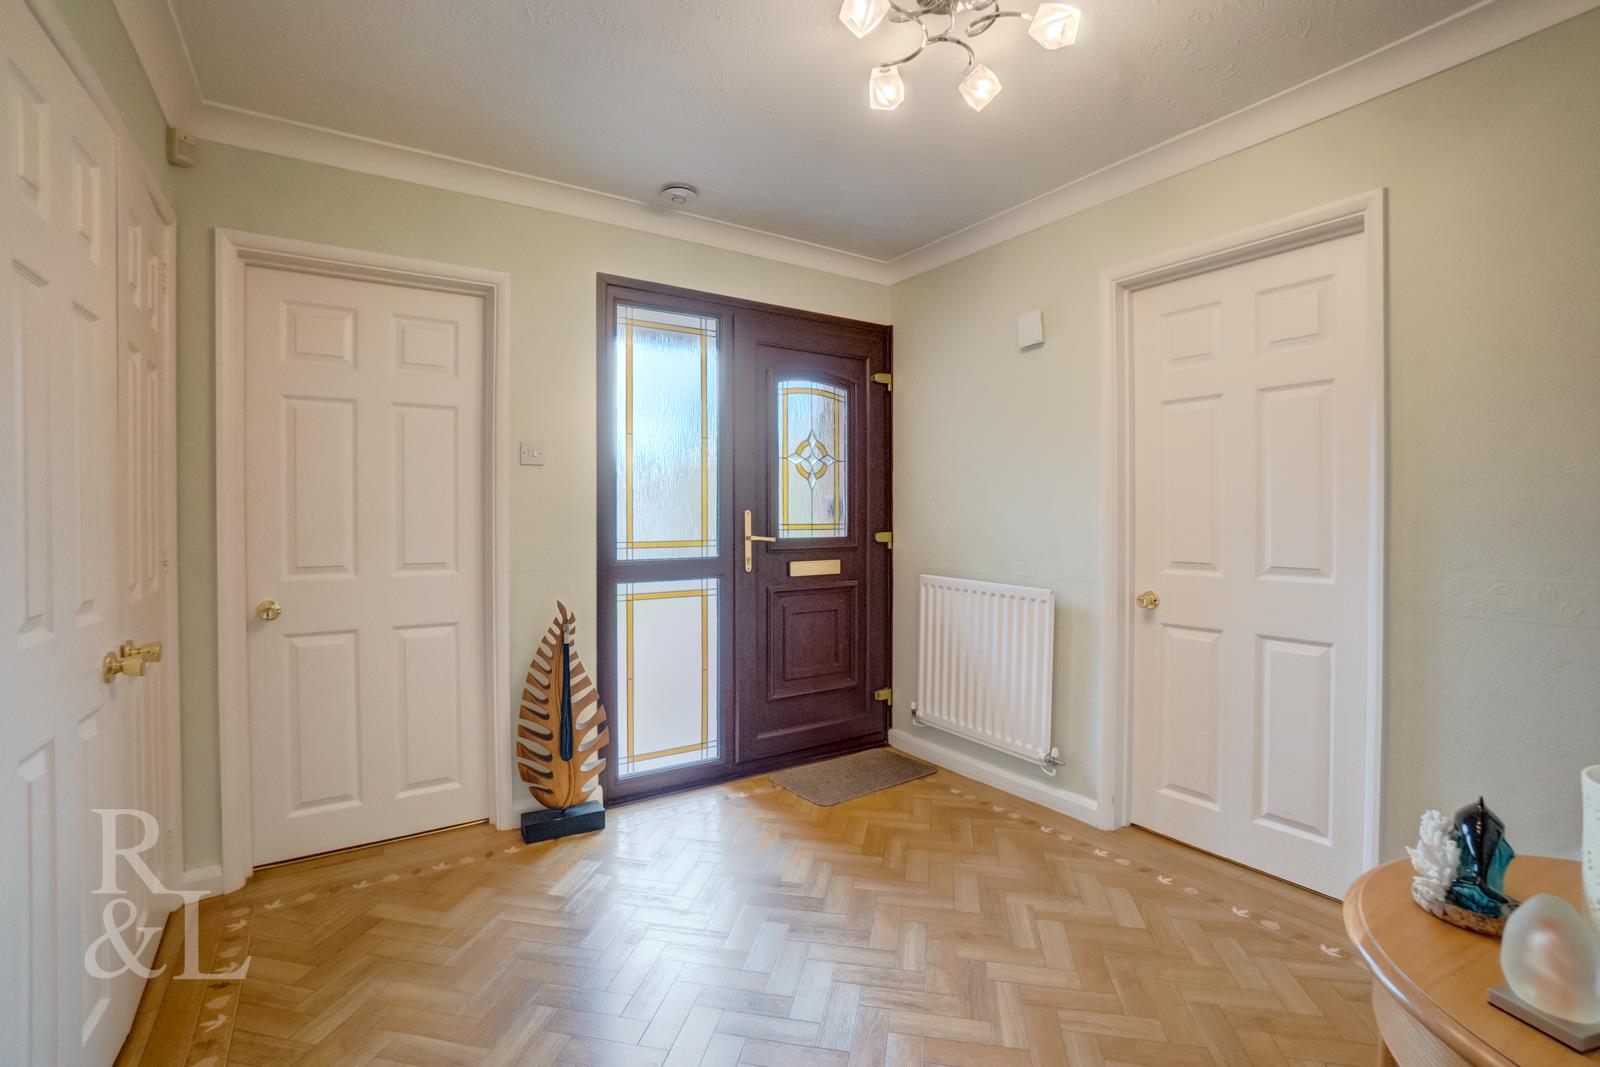 Property image for Willwell Drive, West Bridgford, Nottingham